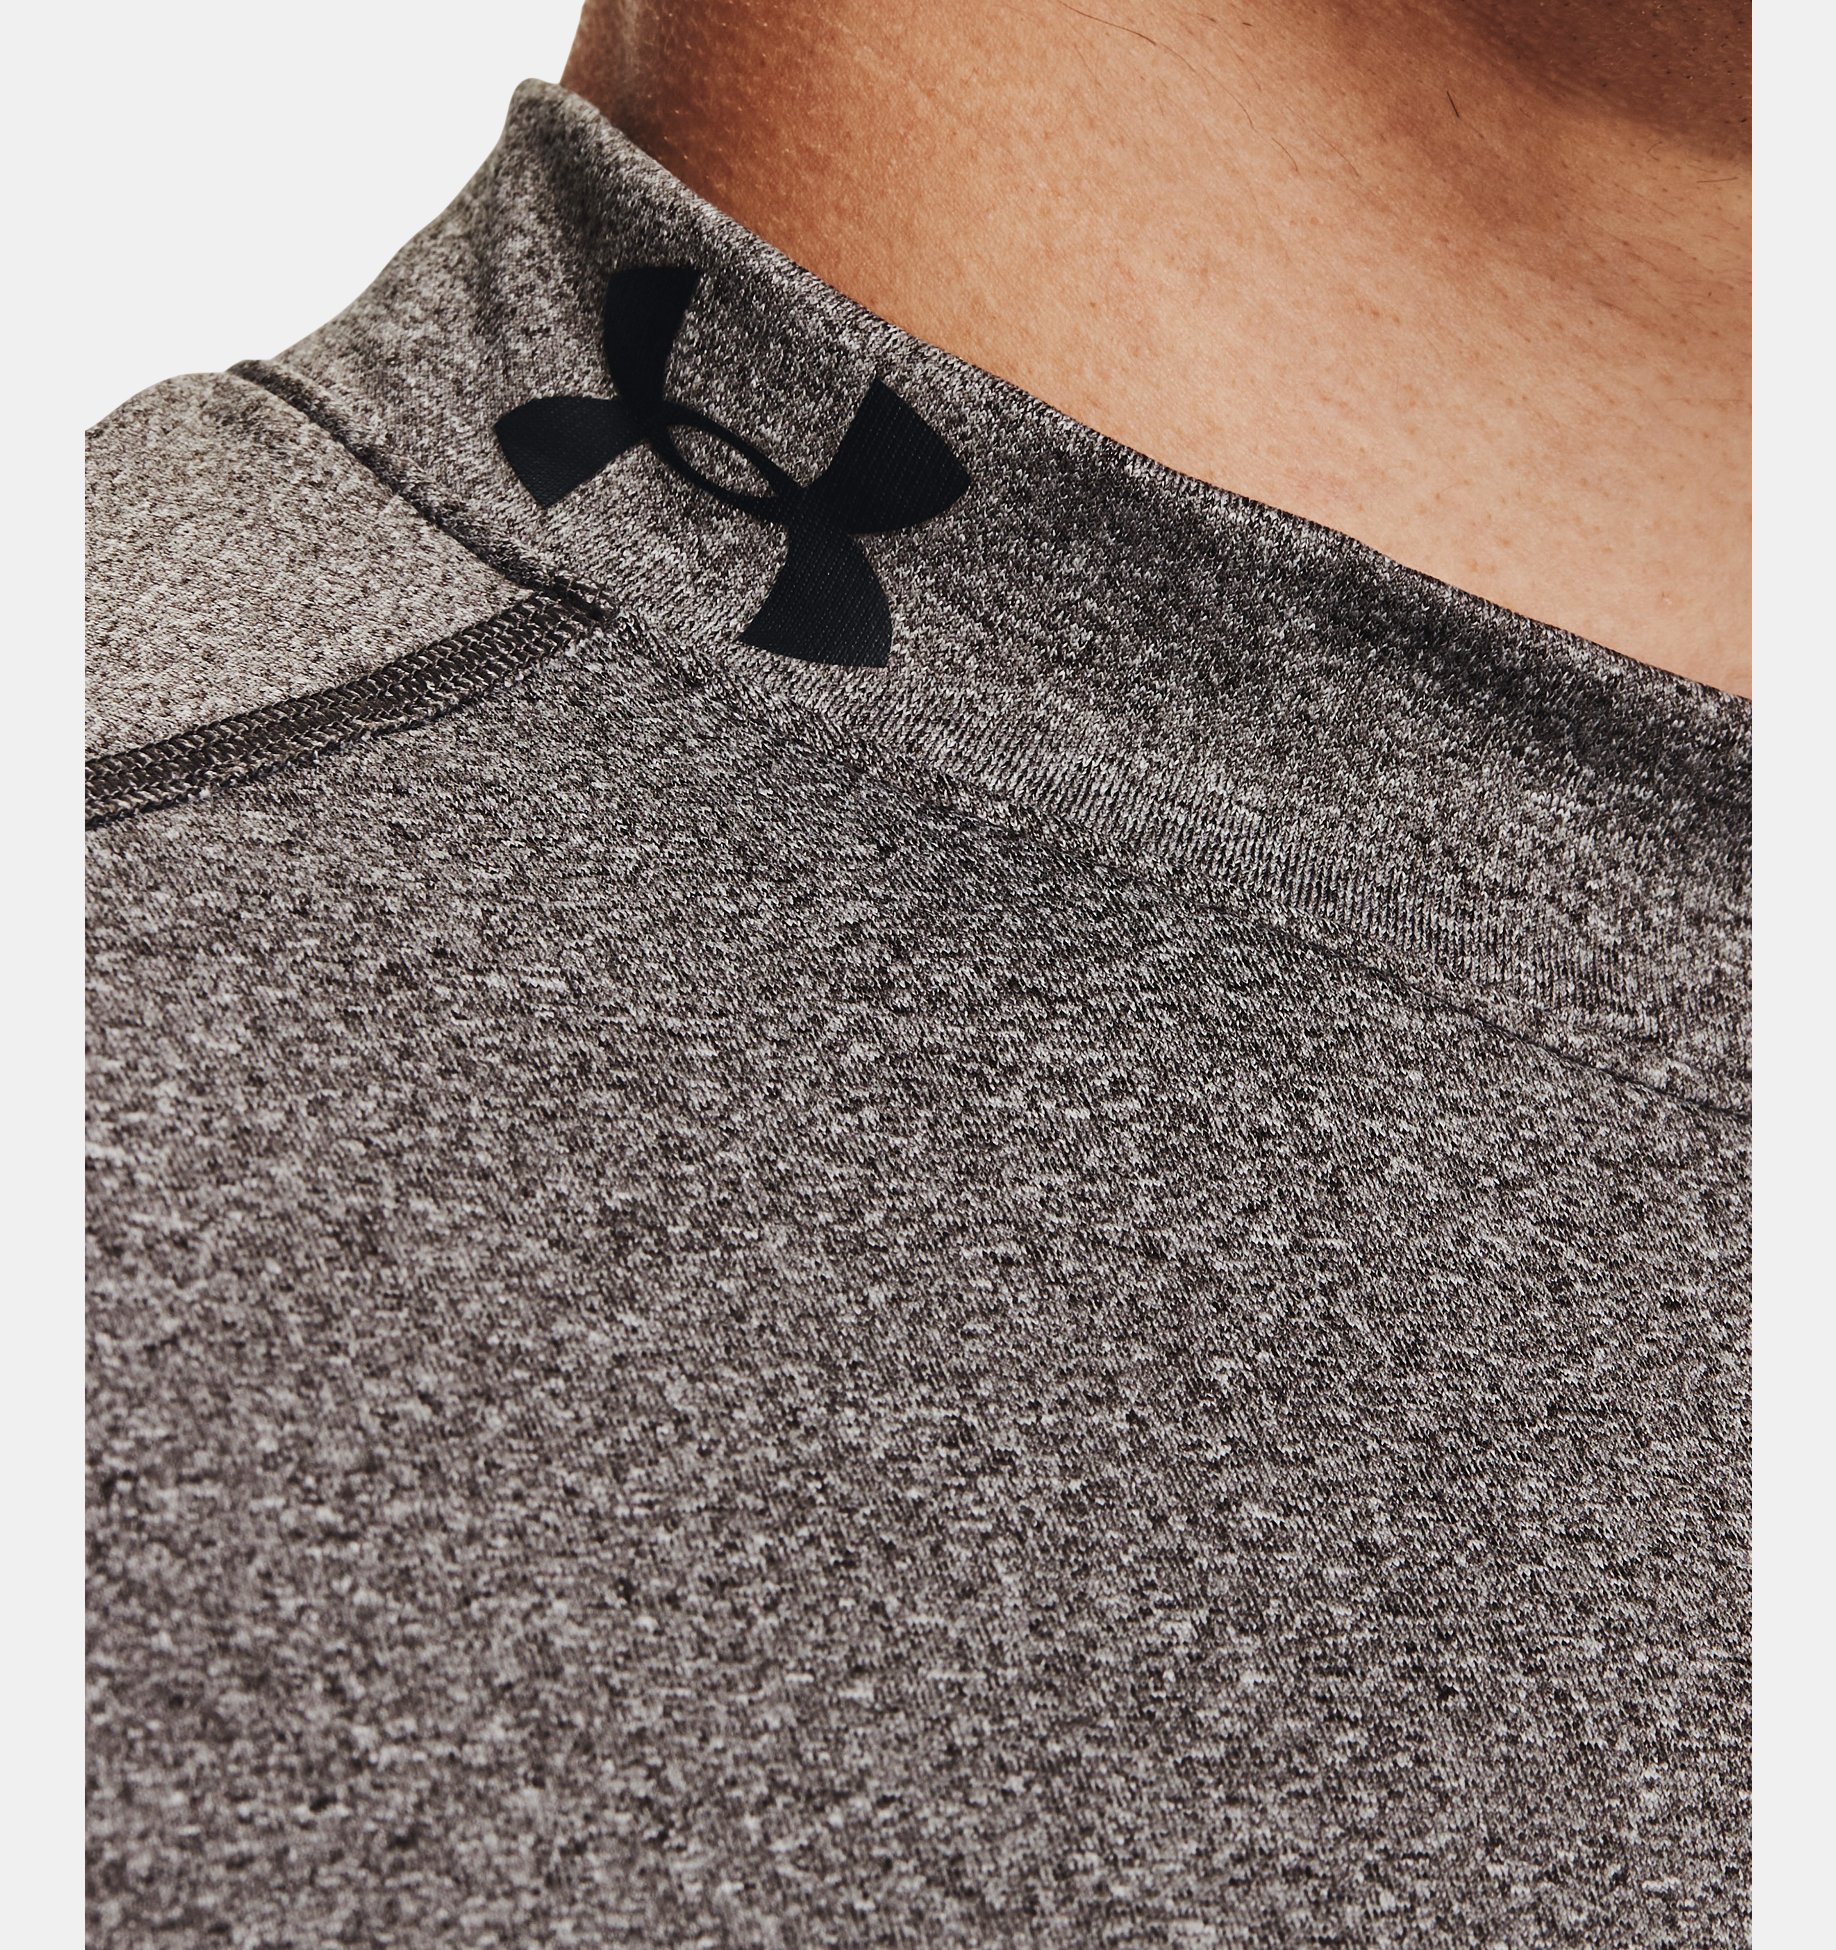 Details about   Underarmor Cold Gear Fitted Mock Neck Men's M 